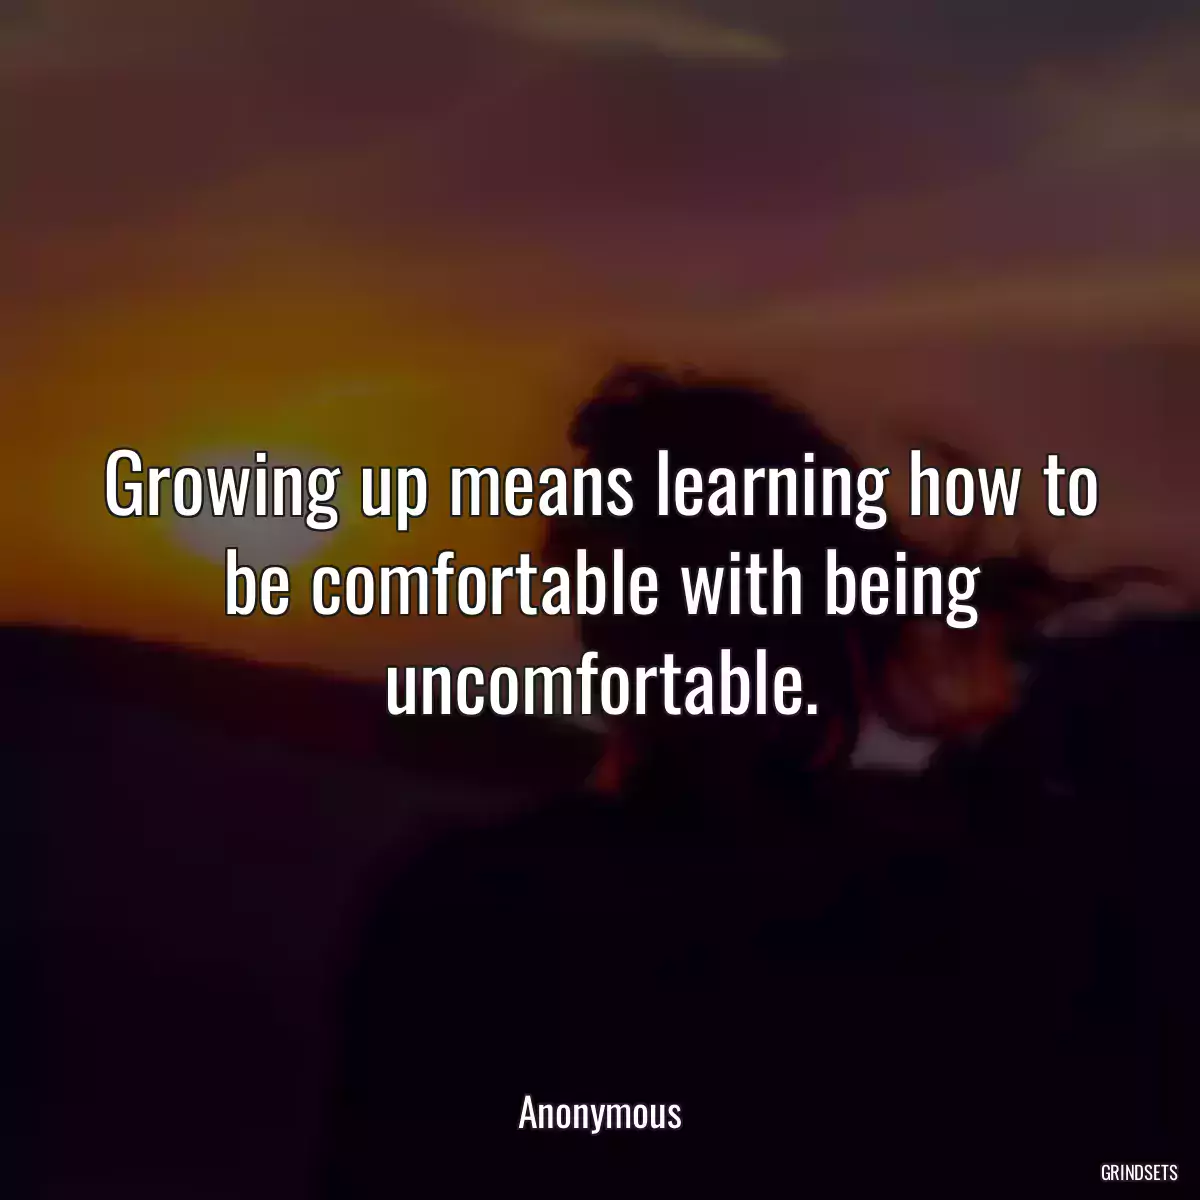 Growing up means learning how to be comfortable with being uncomfortable.